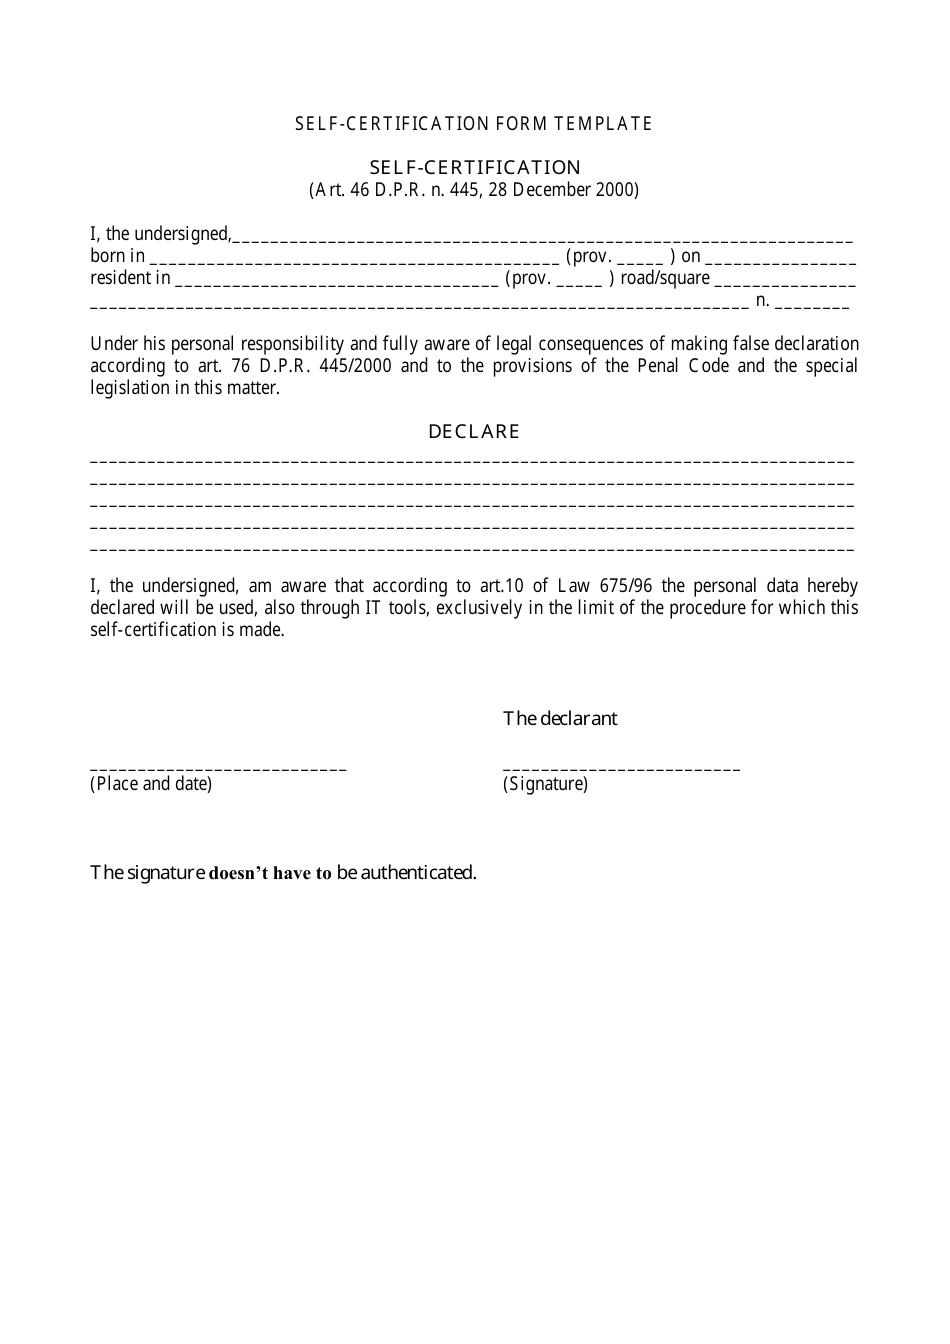 Self-certification Form Template - Italian Embassy in Iraq - Baghdad Governorate, Iraq, Page 1